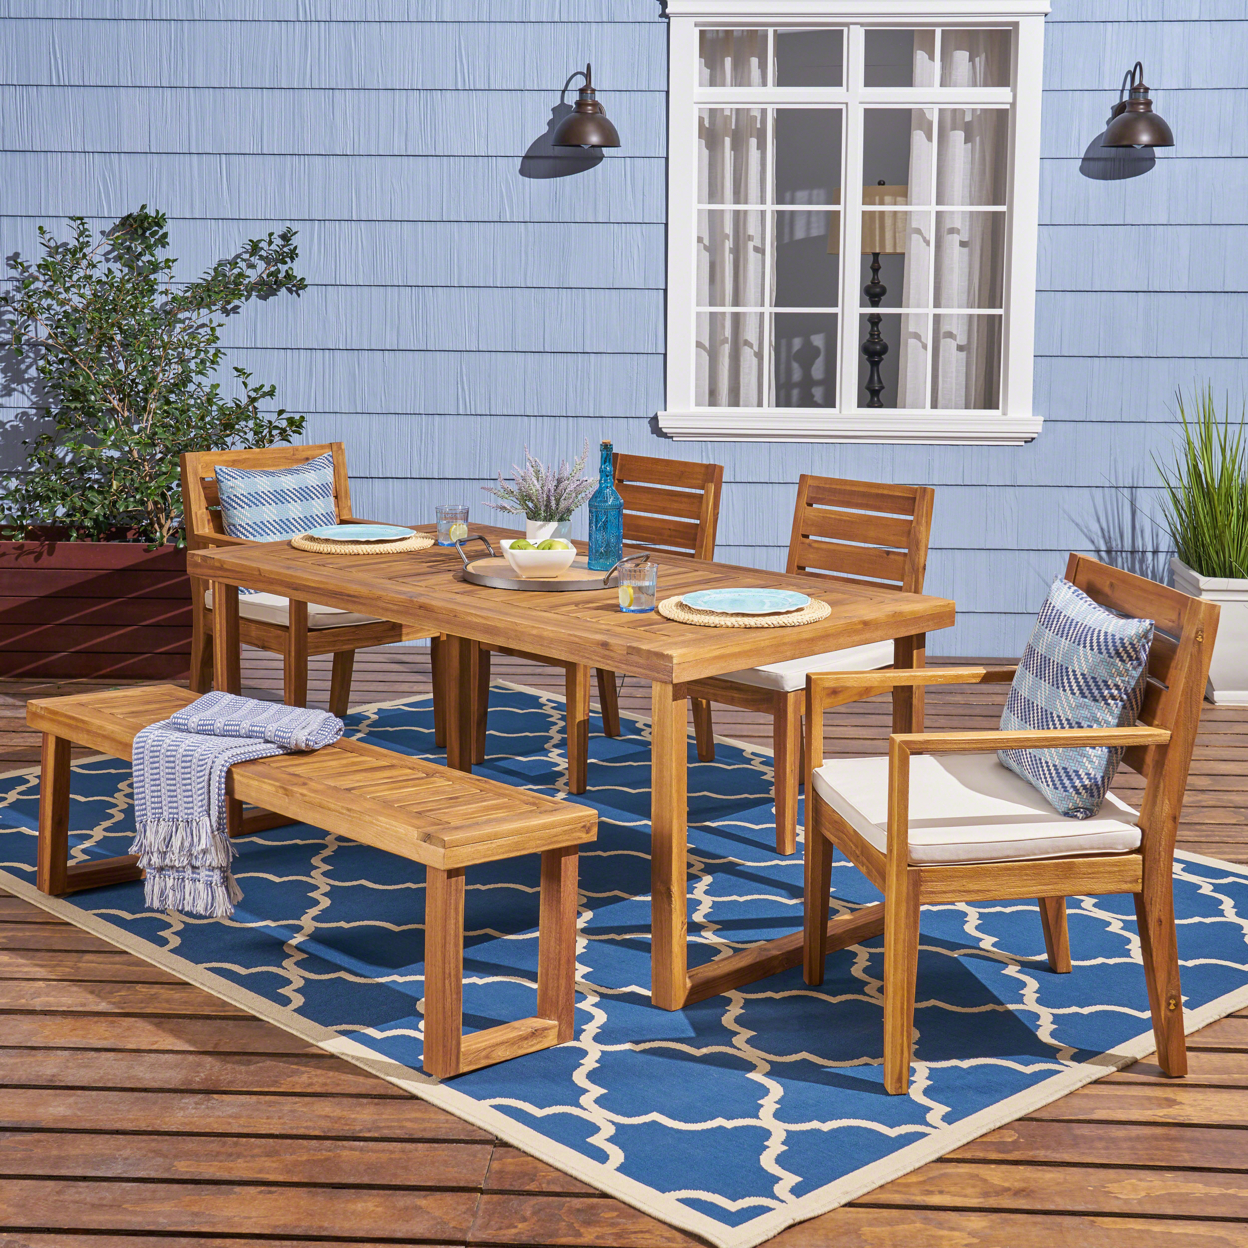 Alice Outdoor 6-Seater Acacia Wood Dining Set With Bench - Sandblast Natural Stained + Cream